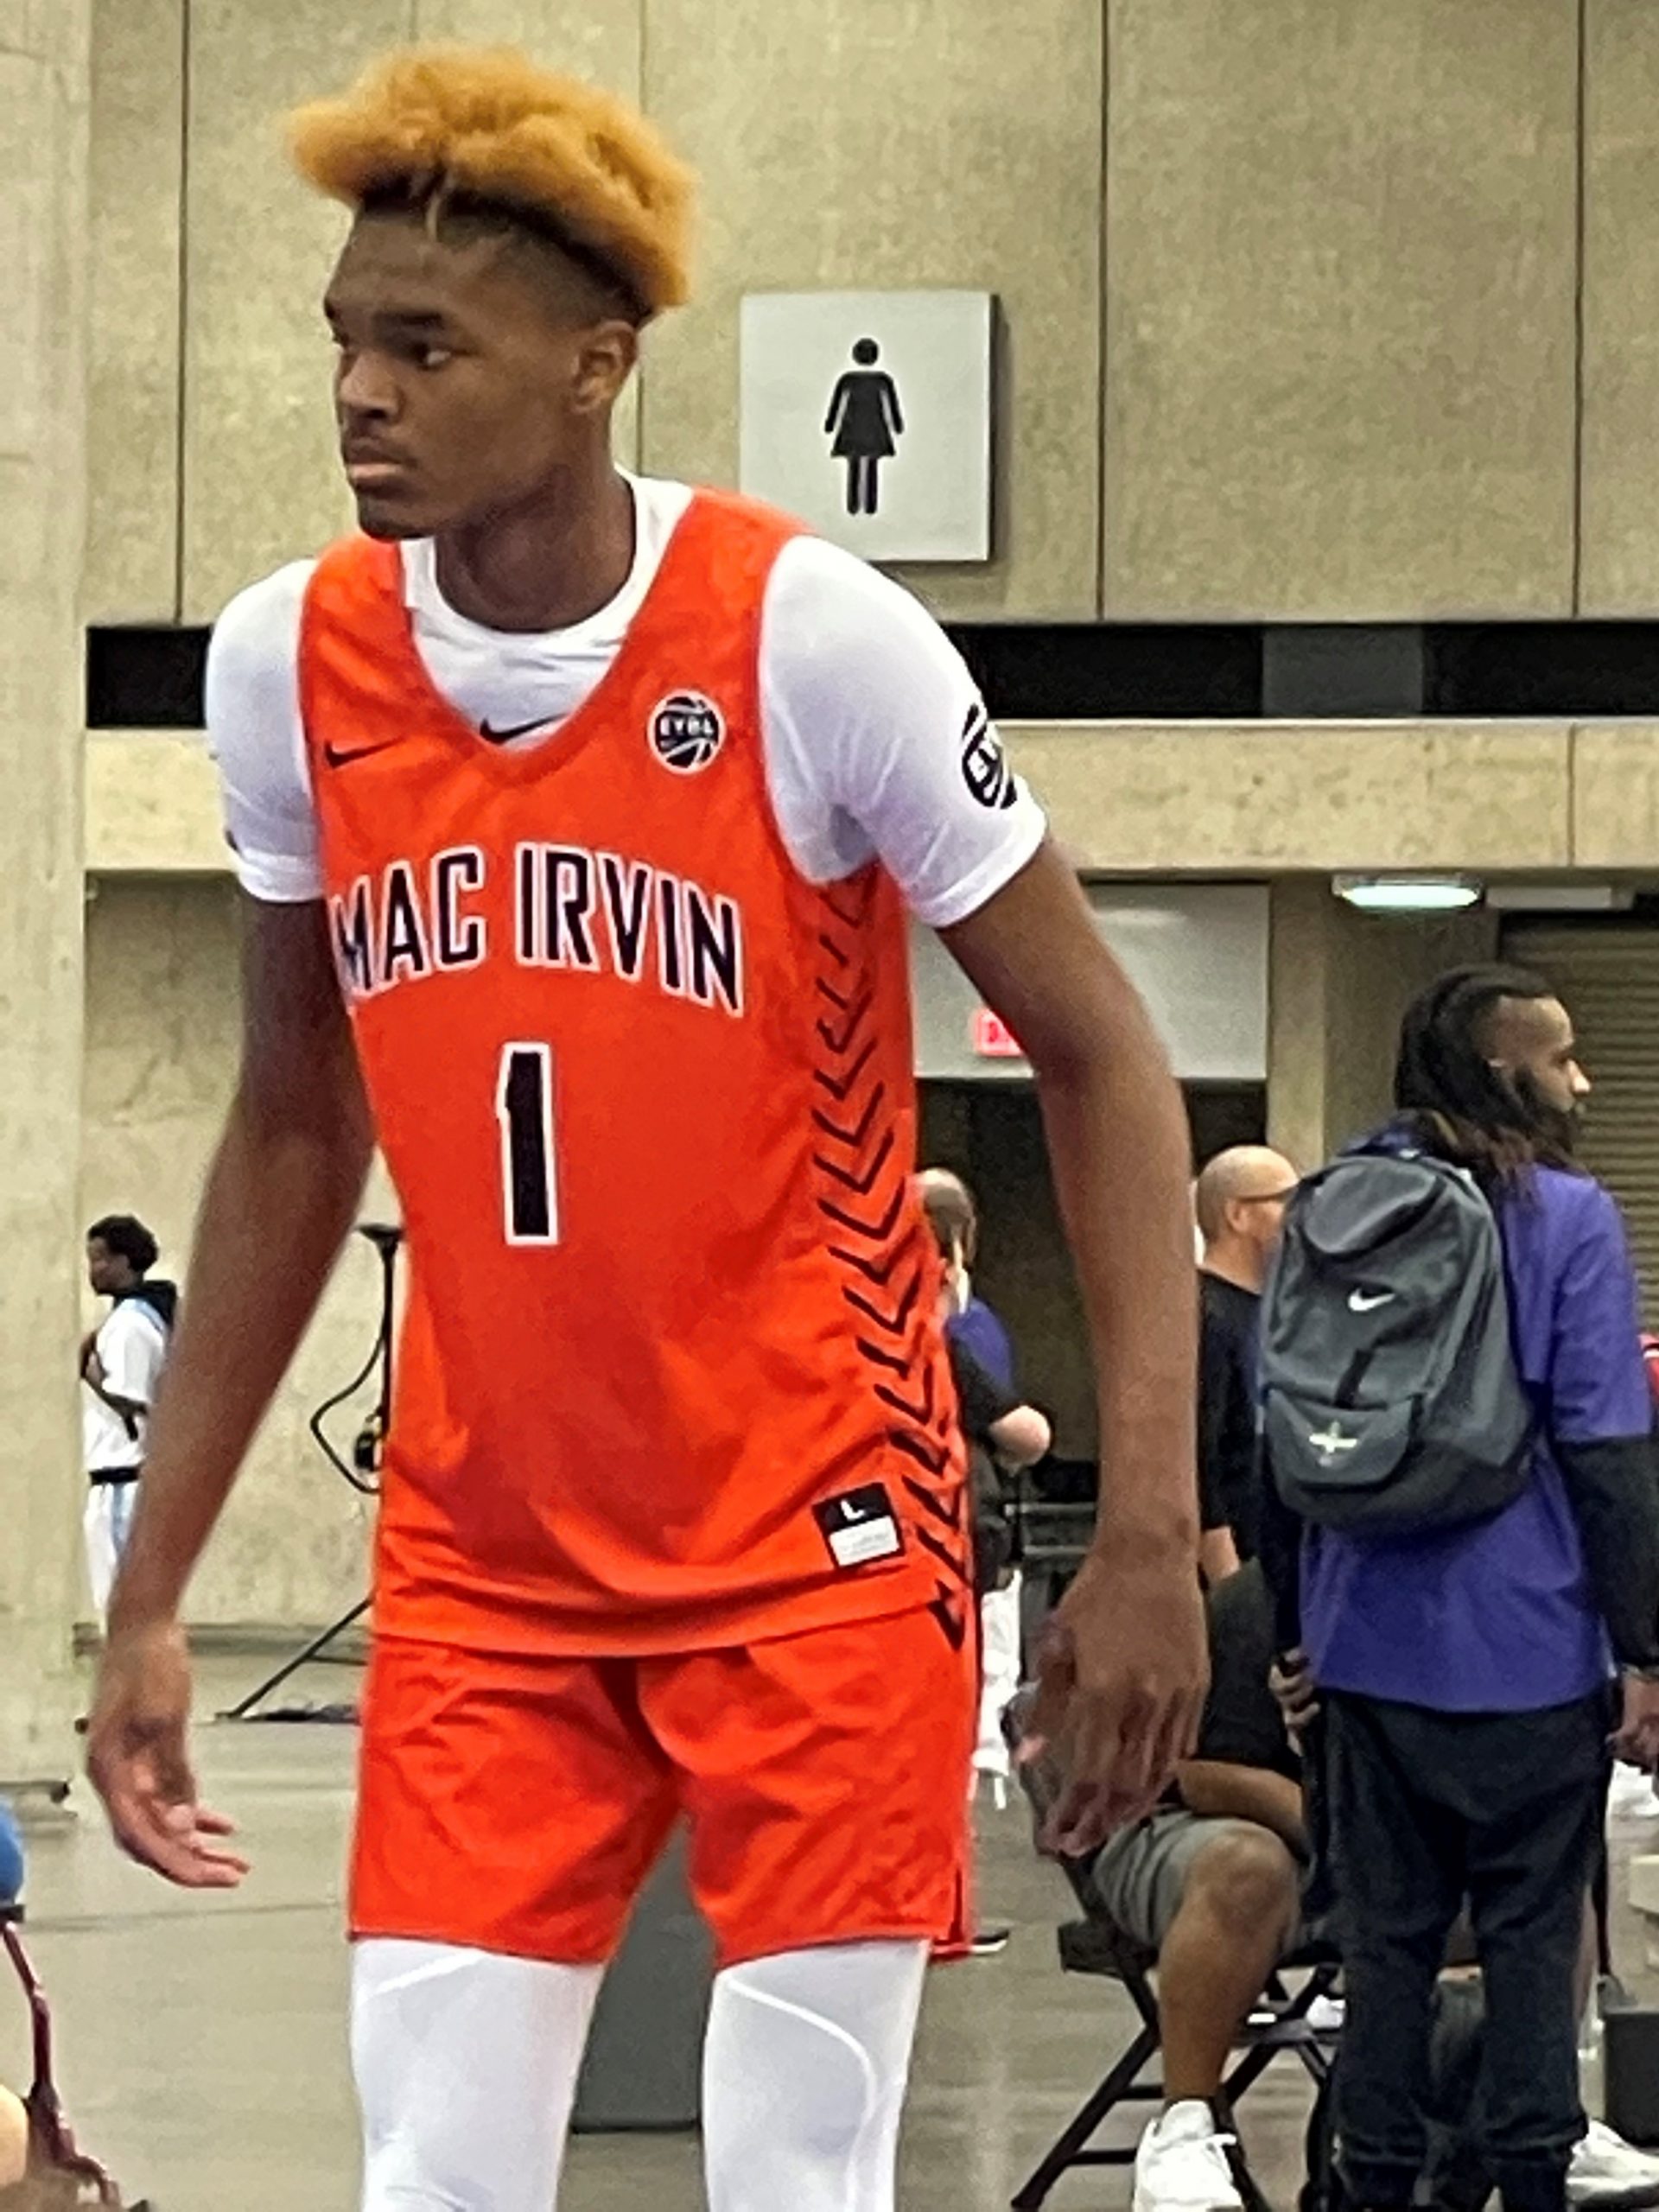 Recruiting: One of the nation’s best visits Illinois